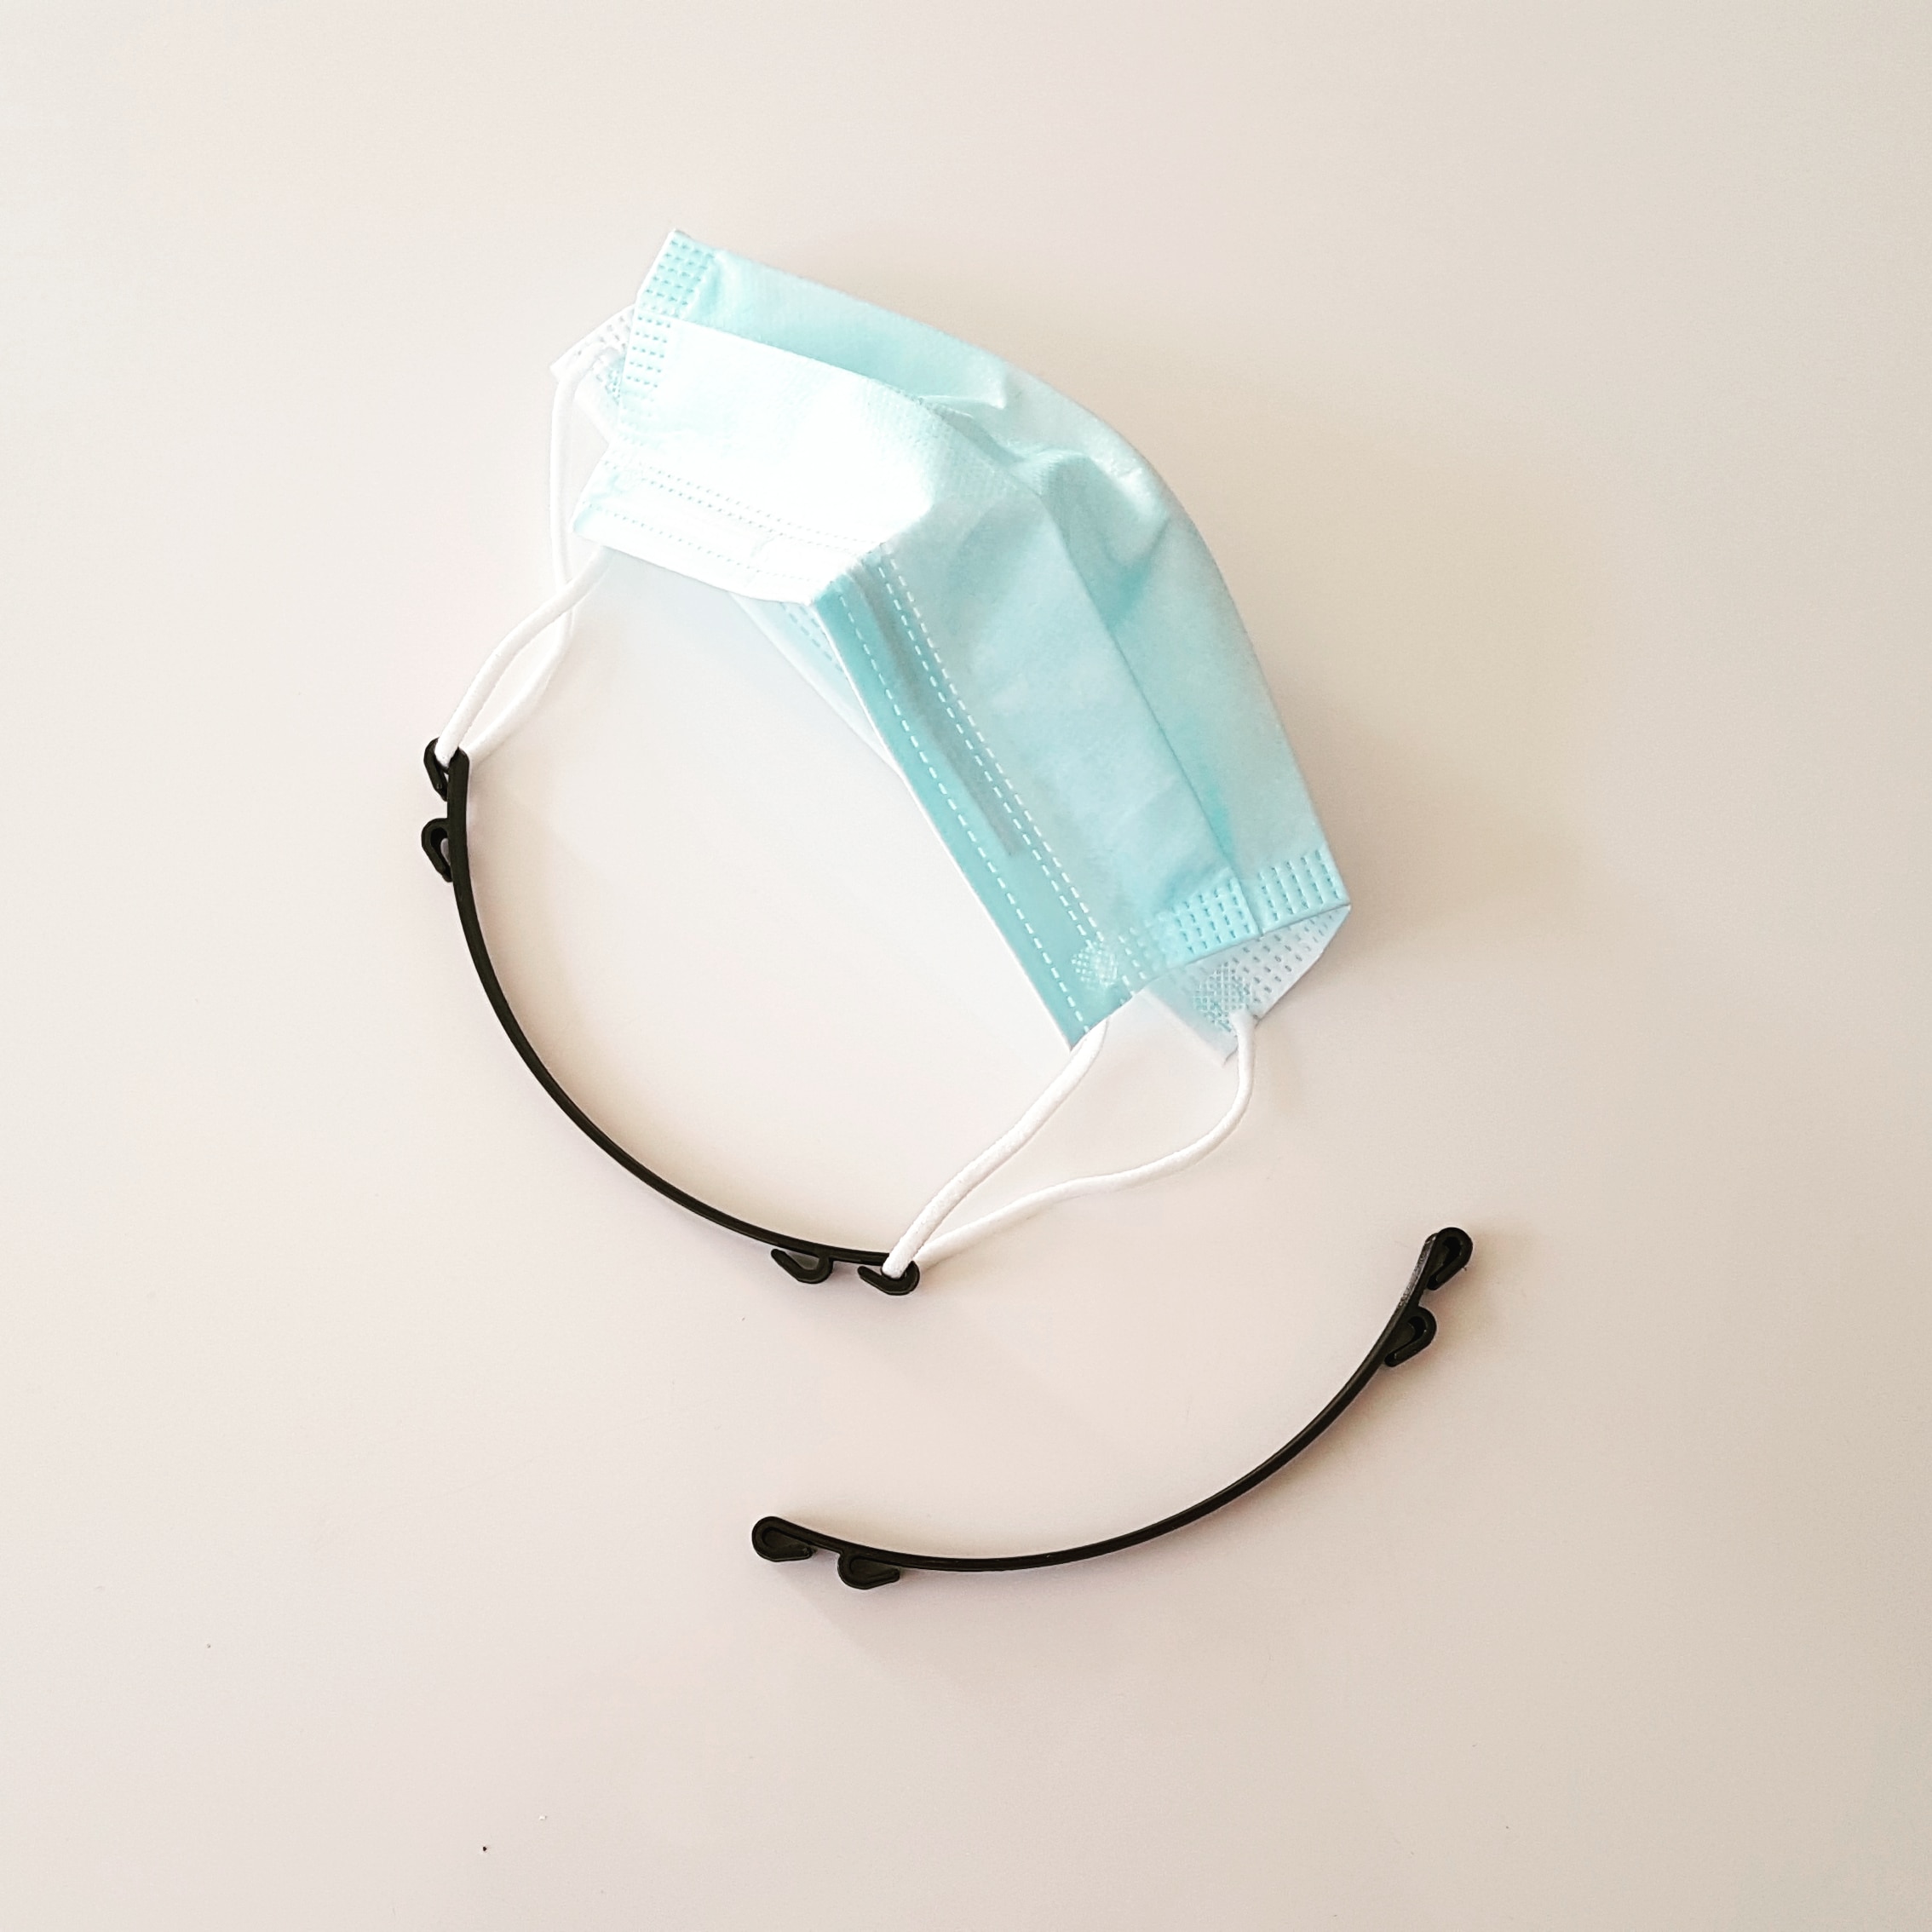 Flexible surgical / COVID mask strap